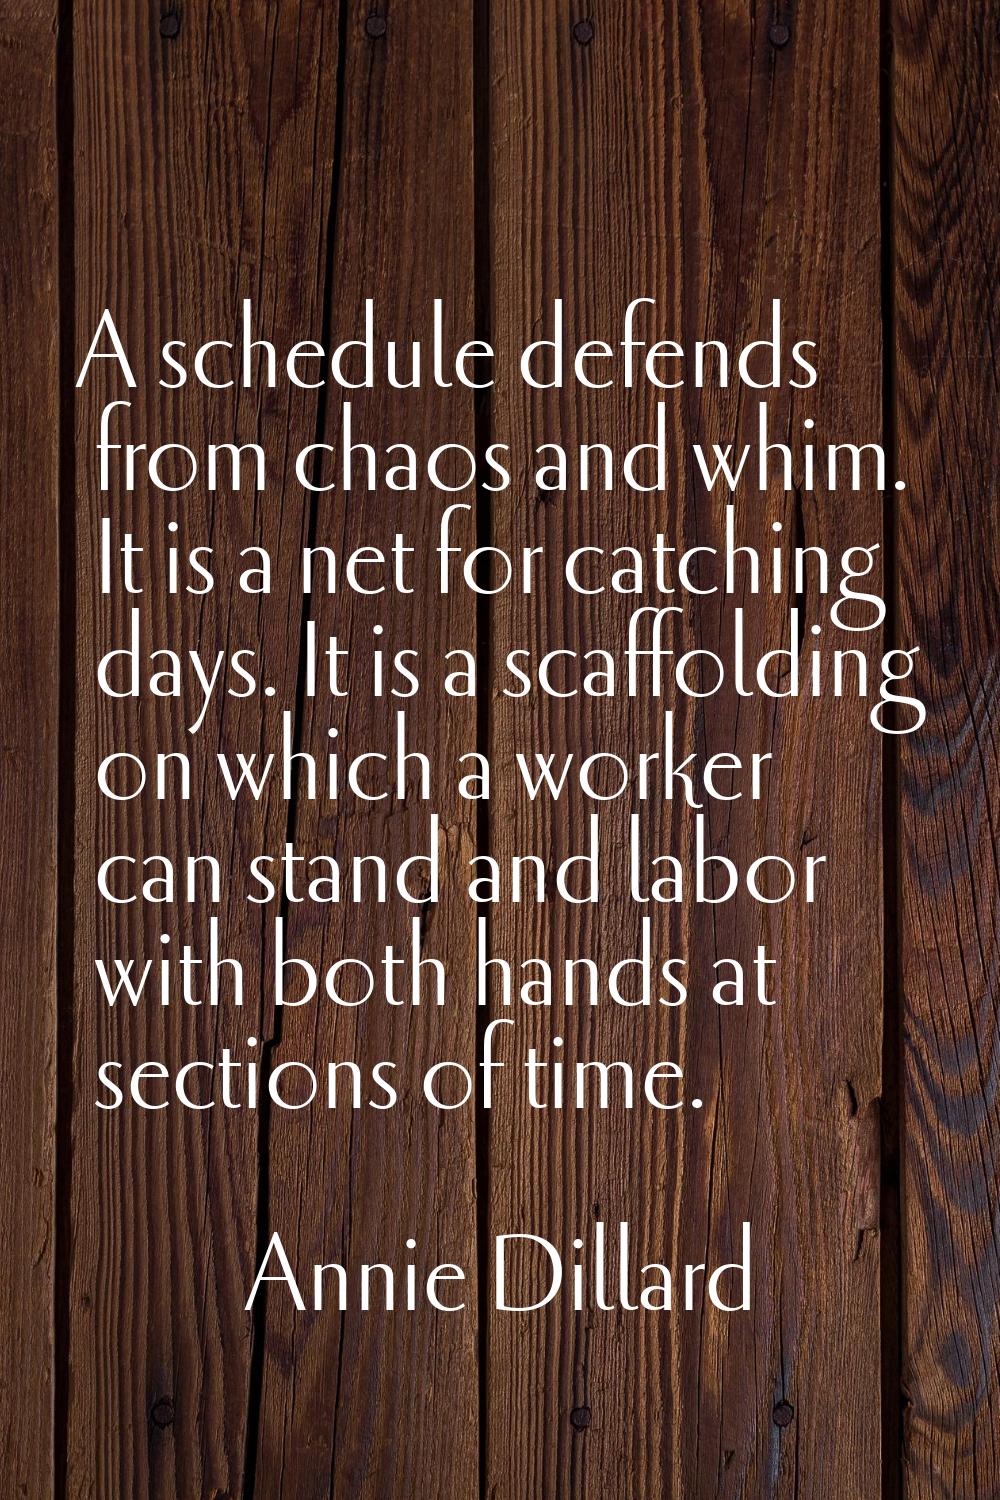 A schedule defends from chaos and whim. It is a net for catching days. It is a scaffolding on which